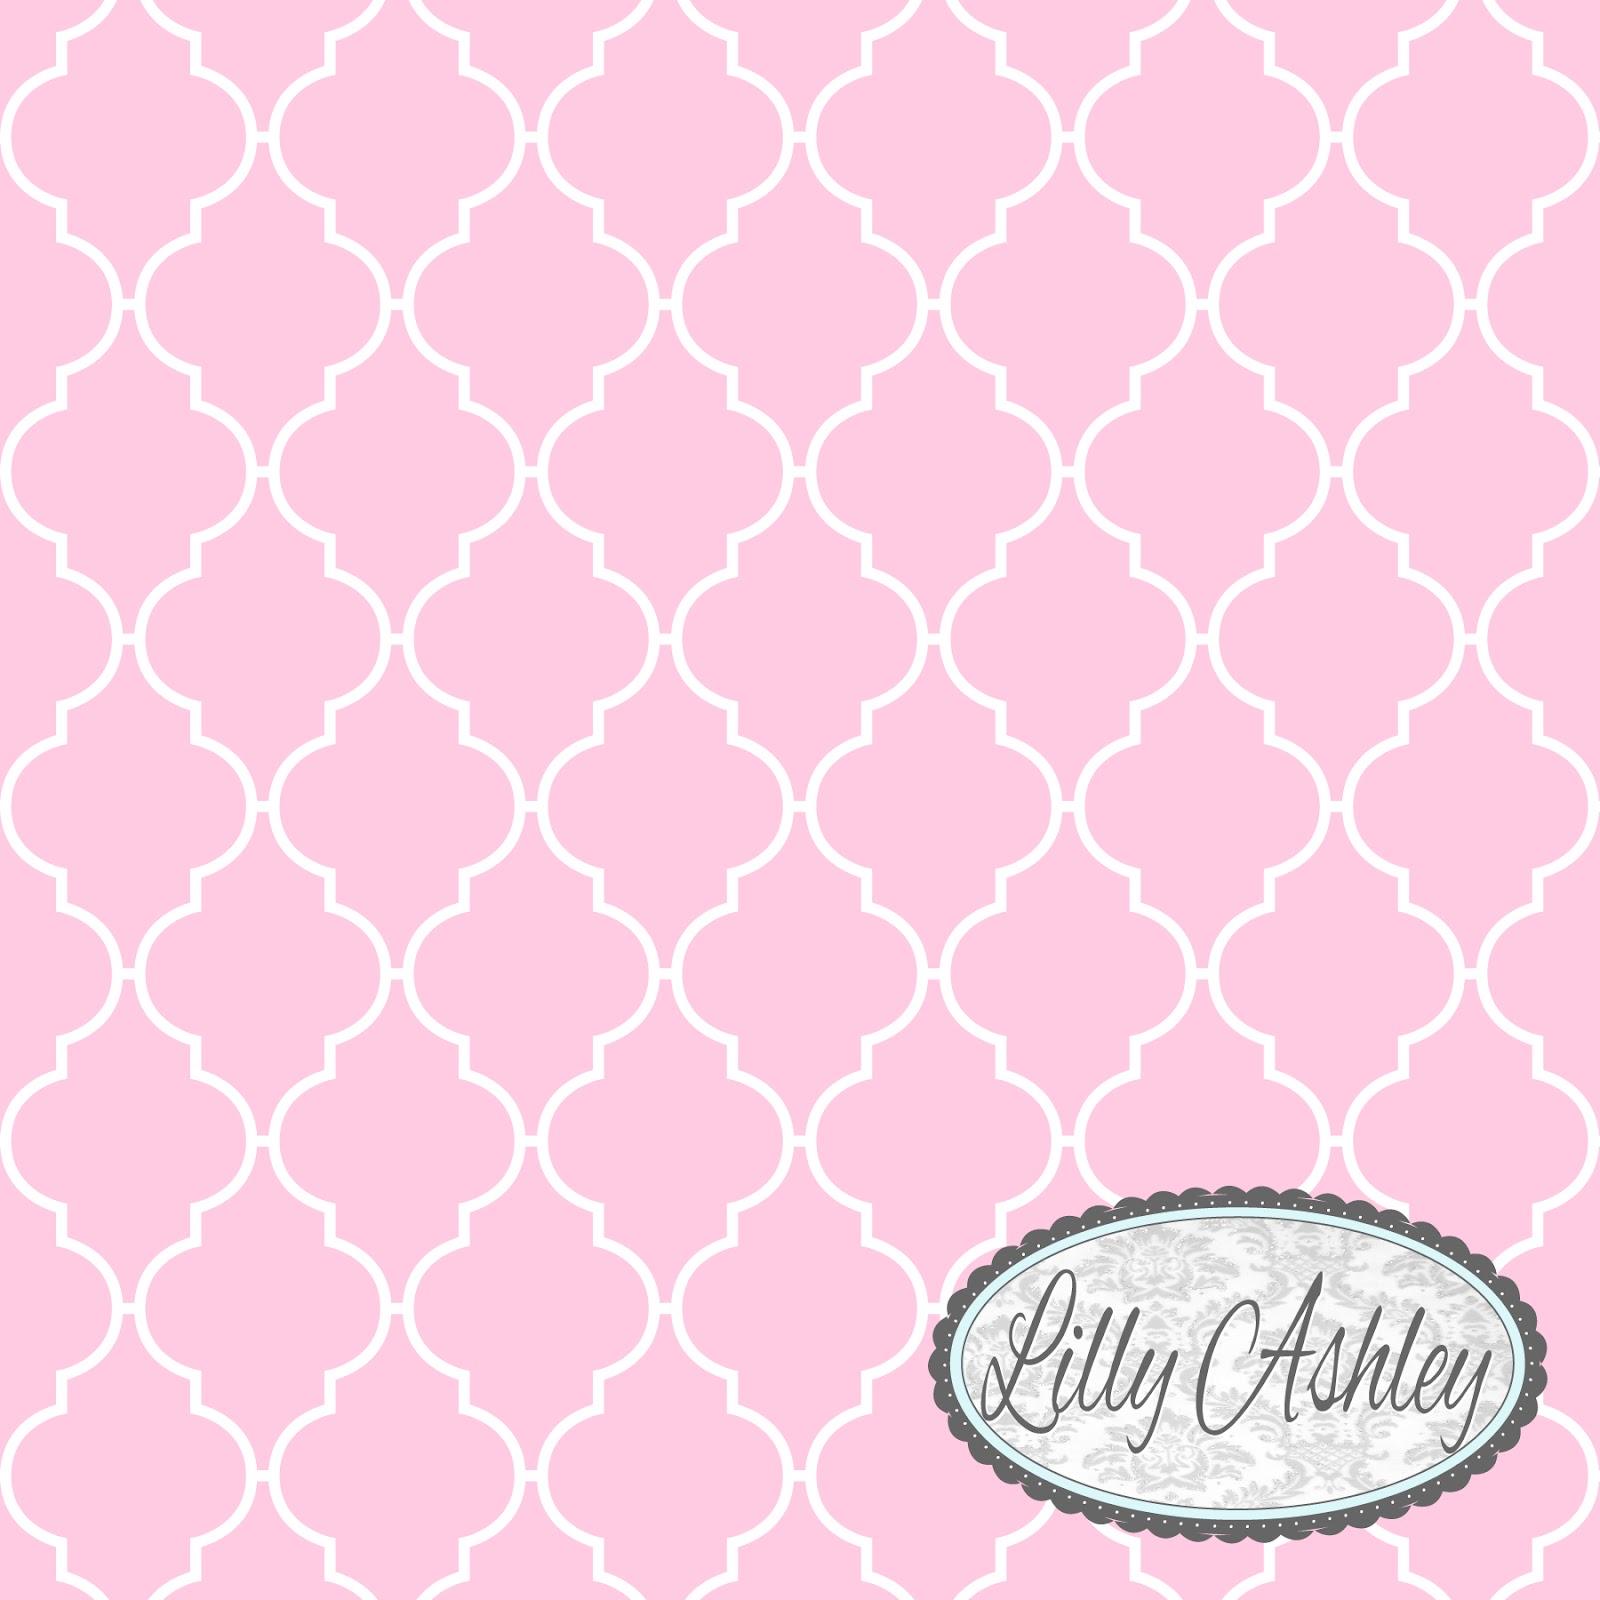 Light Pink Chevron Background An Example Of The Large